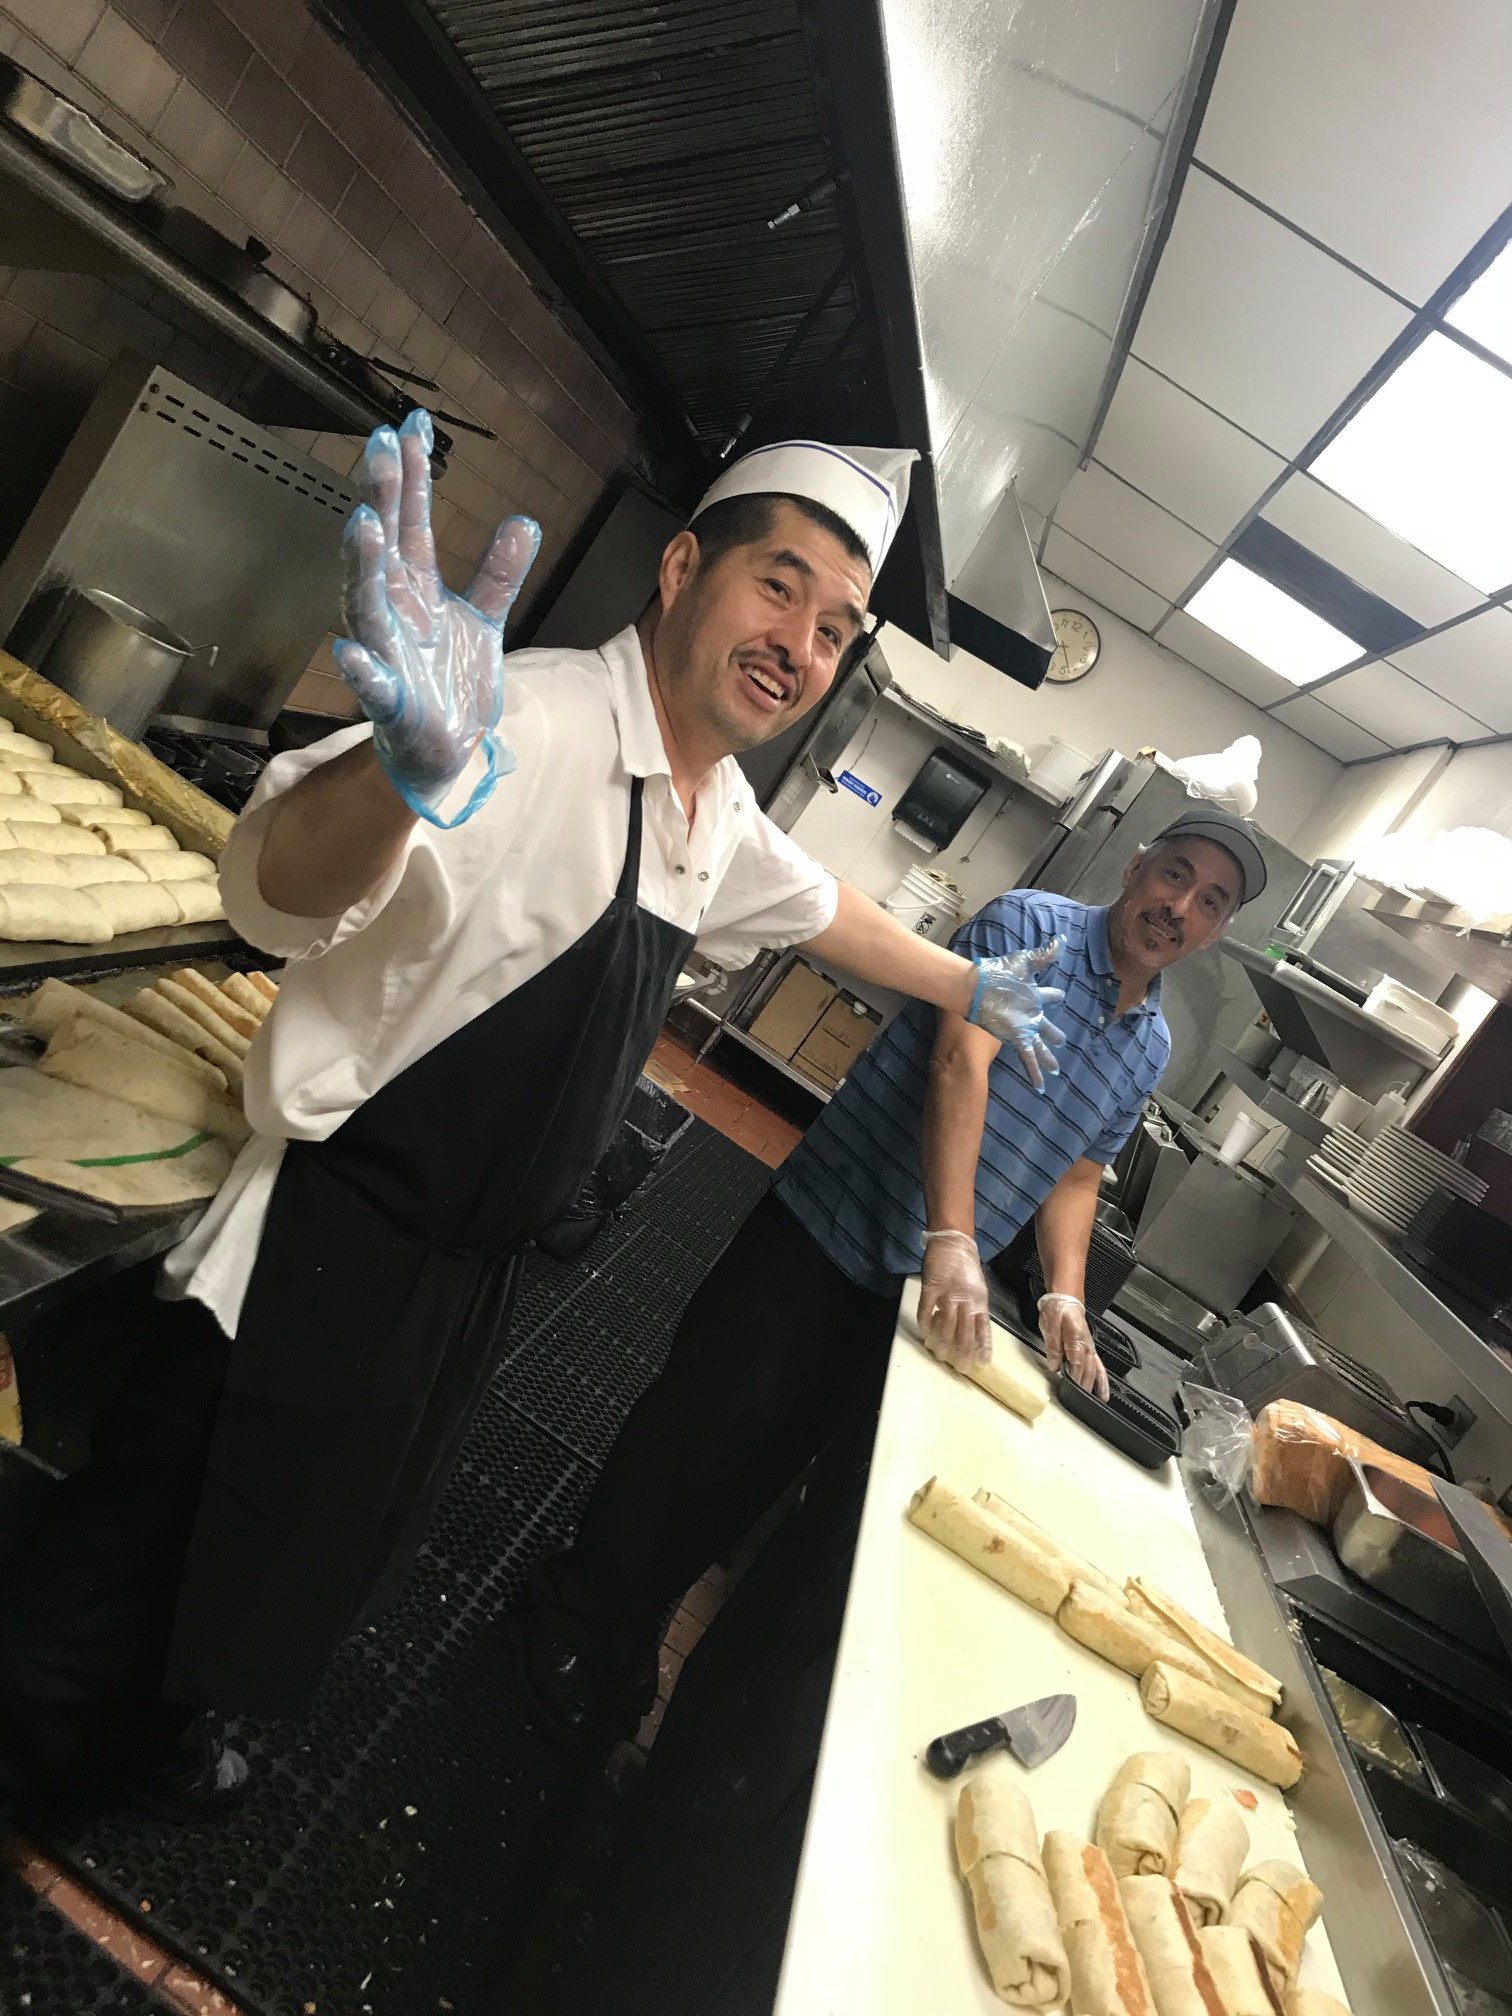 Palatine Inn prepared 100 meals for our families